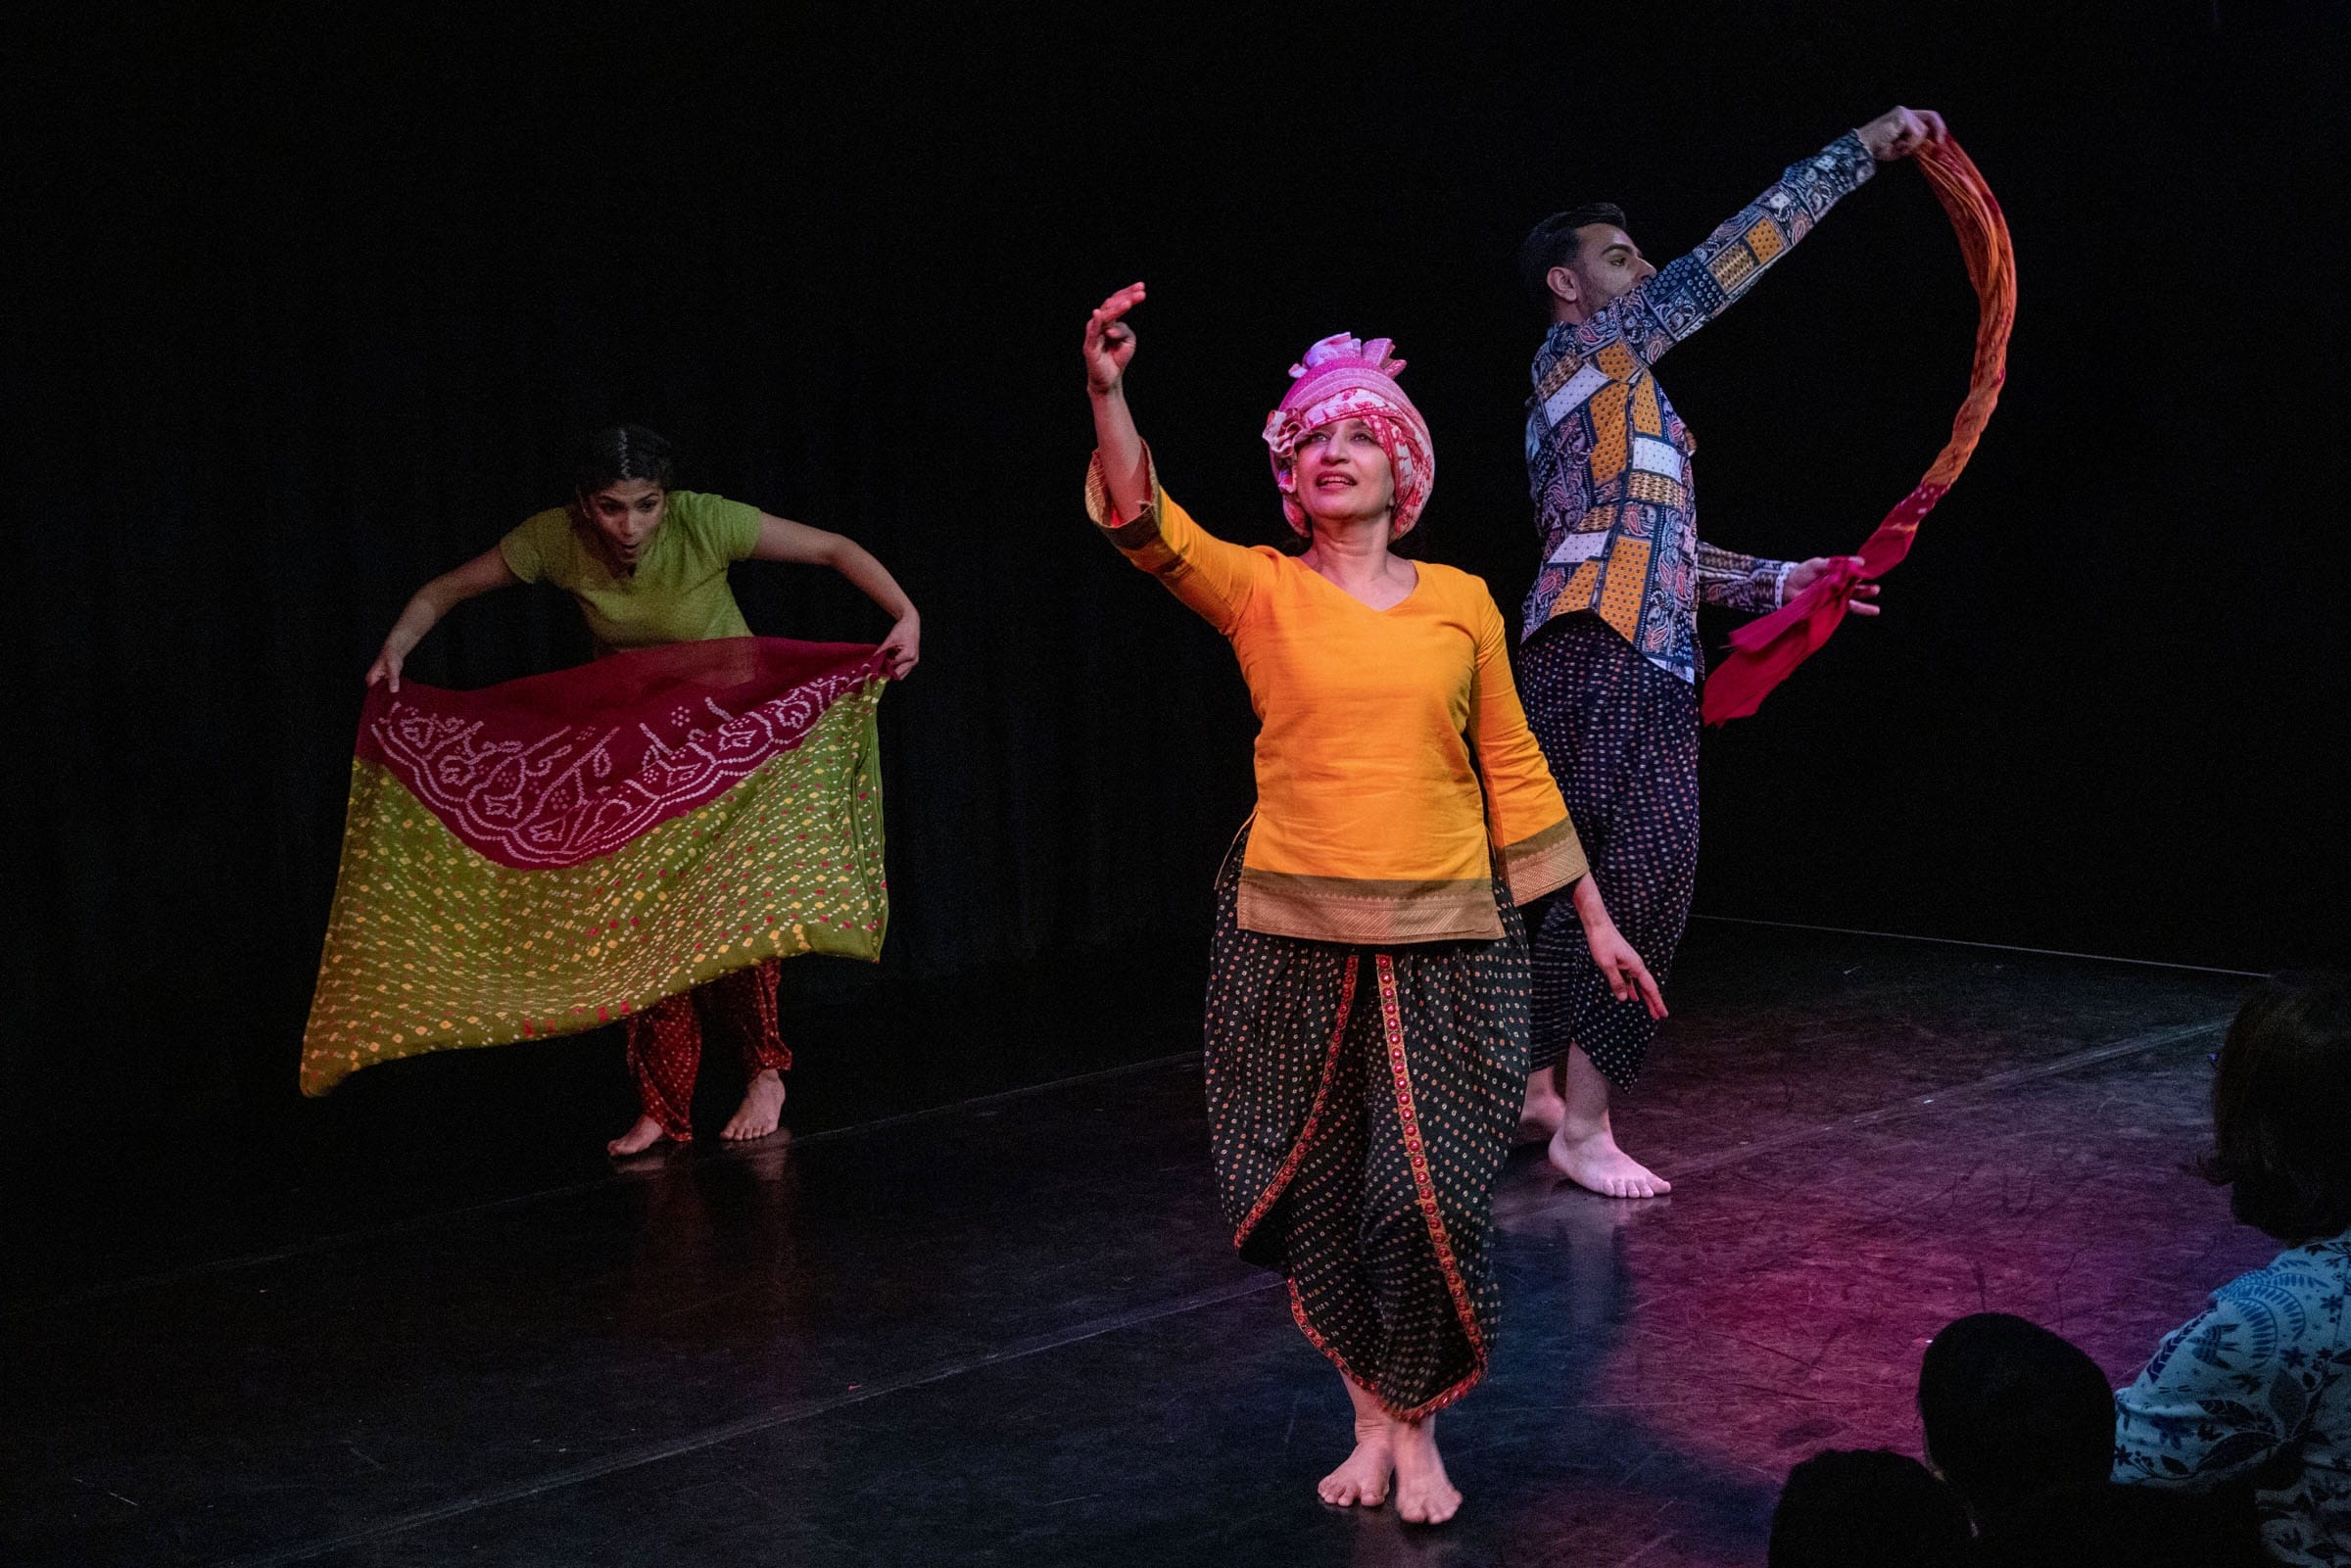 Onstage, three Desi performers are engaging in traditional Indian dance performance. The performer centre stage wears an orange shirt and pink headdress. The performers in the background are dancing with silk scarves.